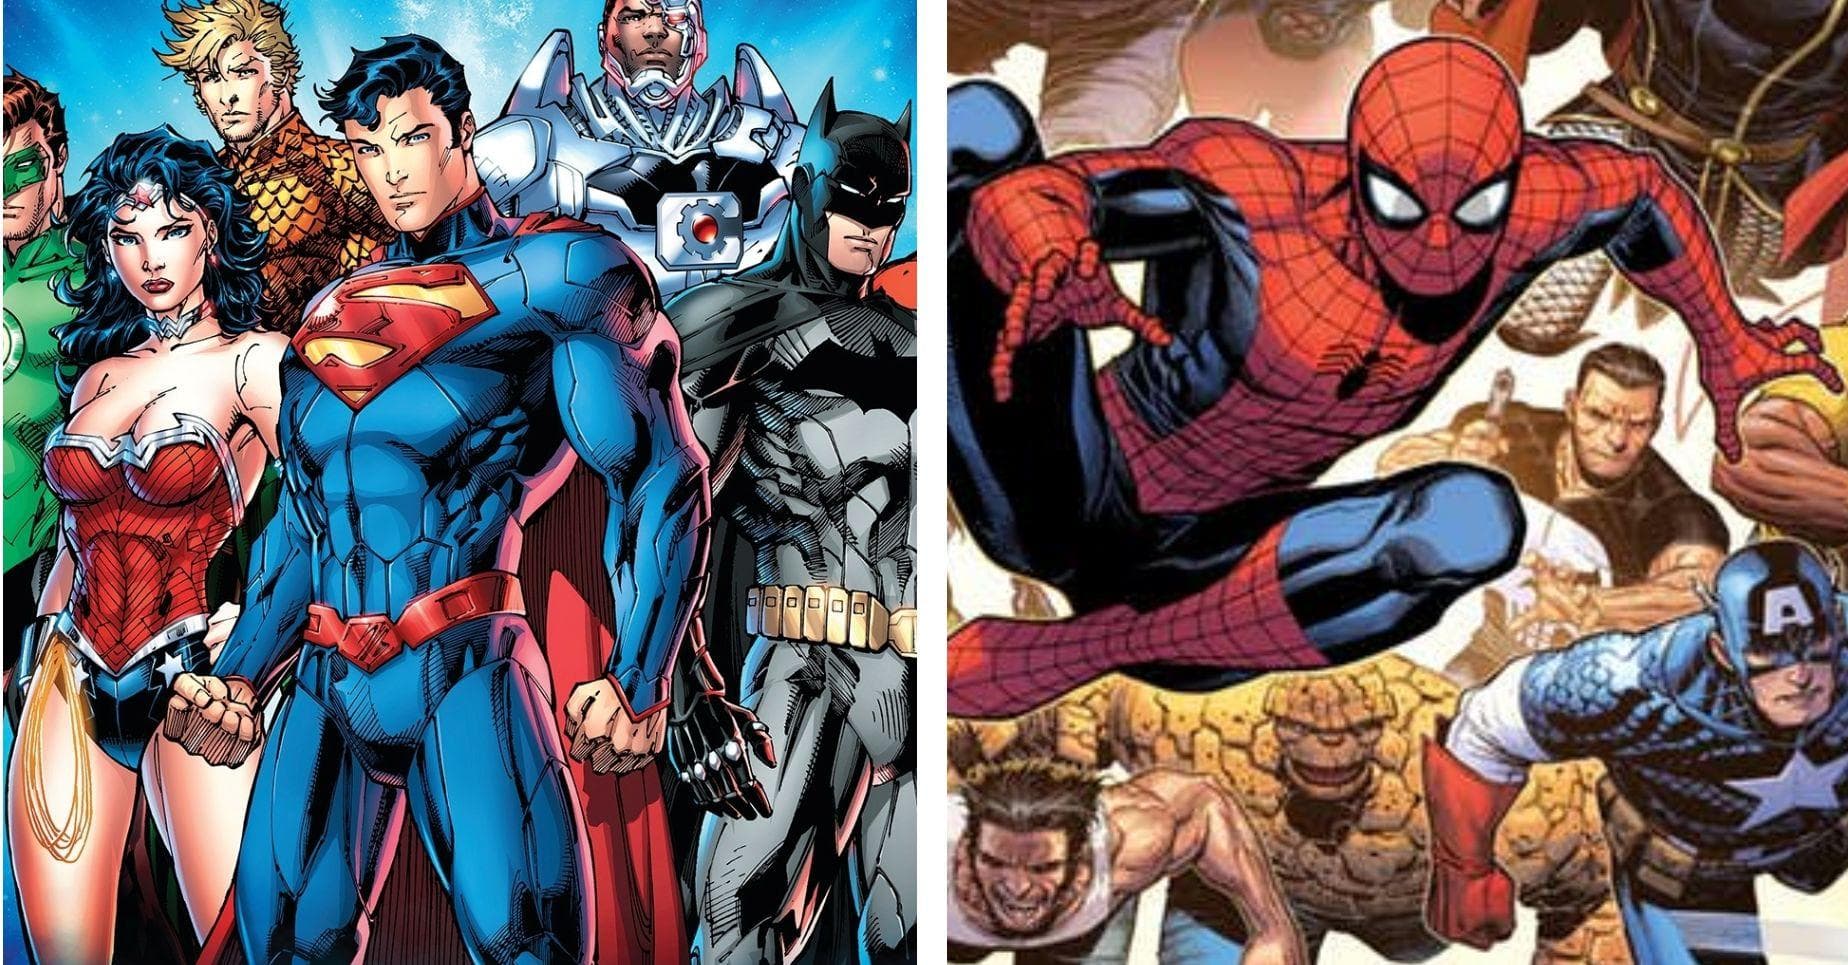 Why DC Comics Is Better Than Marvel, According To Fans